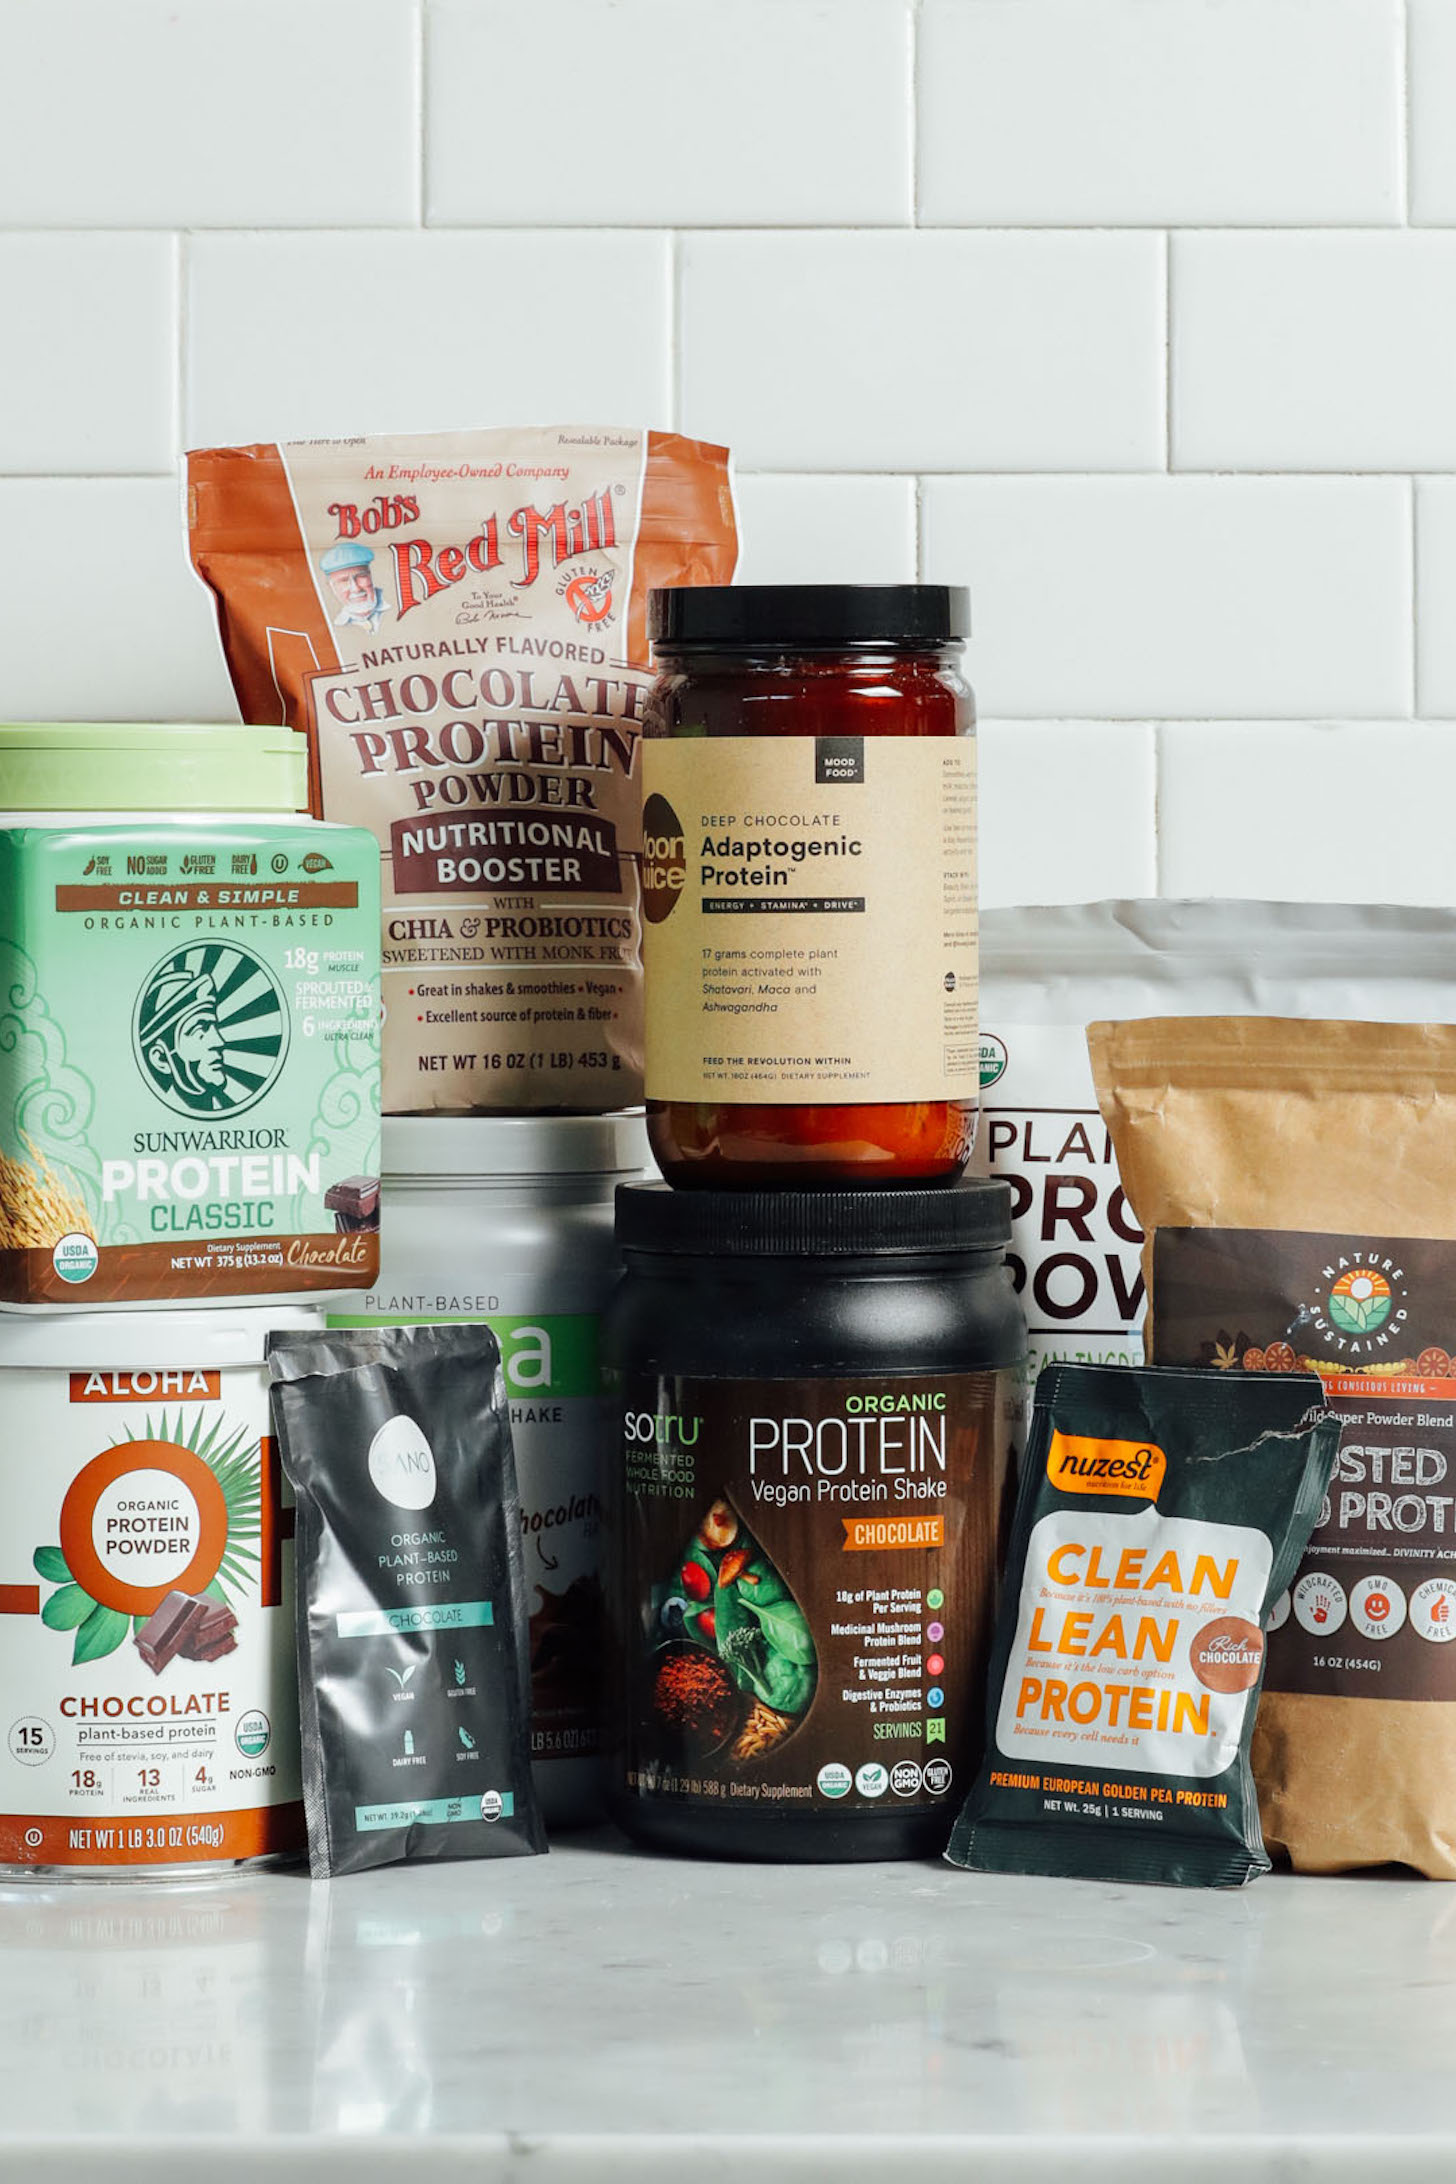 https://minimalistbaker.com/wp-content/uploads/2019/04/EXTENSIVE-Plant-based-CHOCOLATE-Protein-Powder-Review-Top-brands-taste-tested-NOT-sponsored-chocolate-proteinpowder-protein-plantbased-glutenfree-minimalistbaker-11.jpg